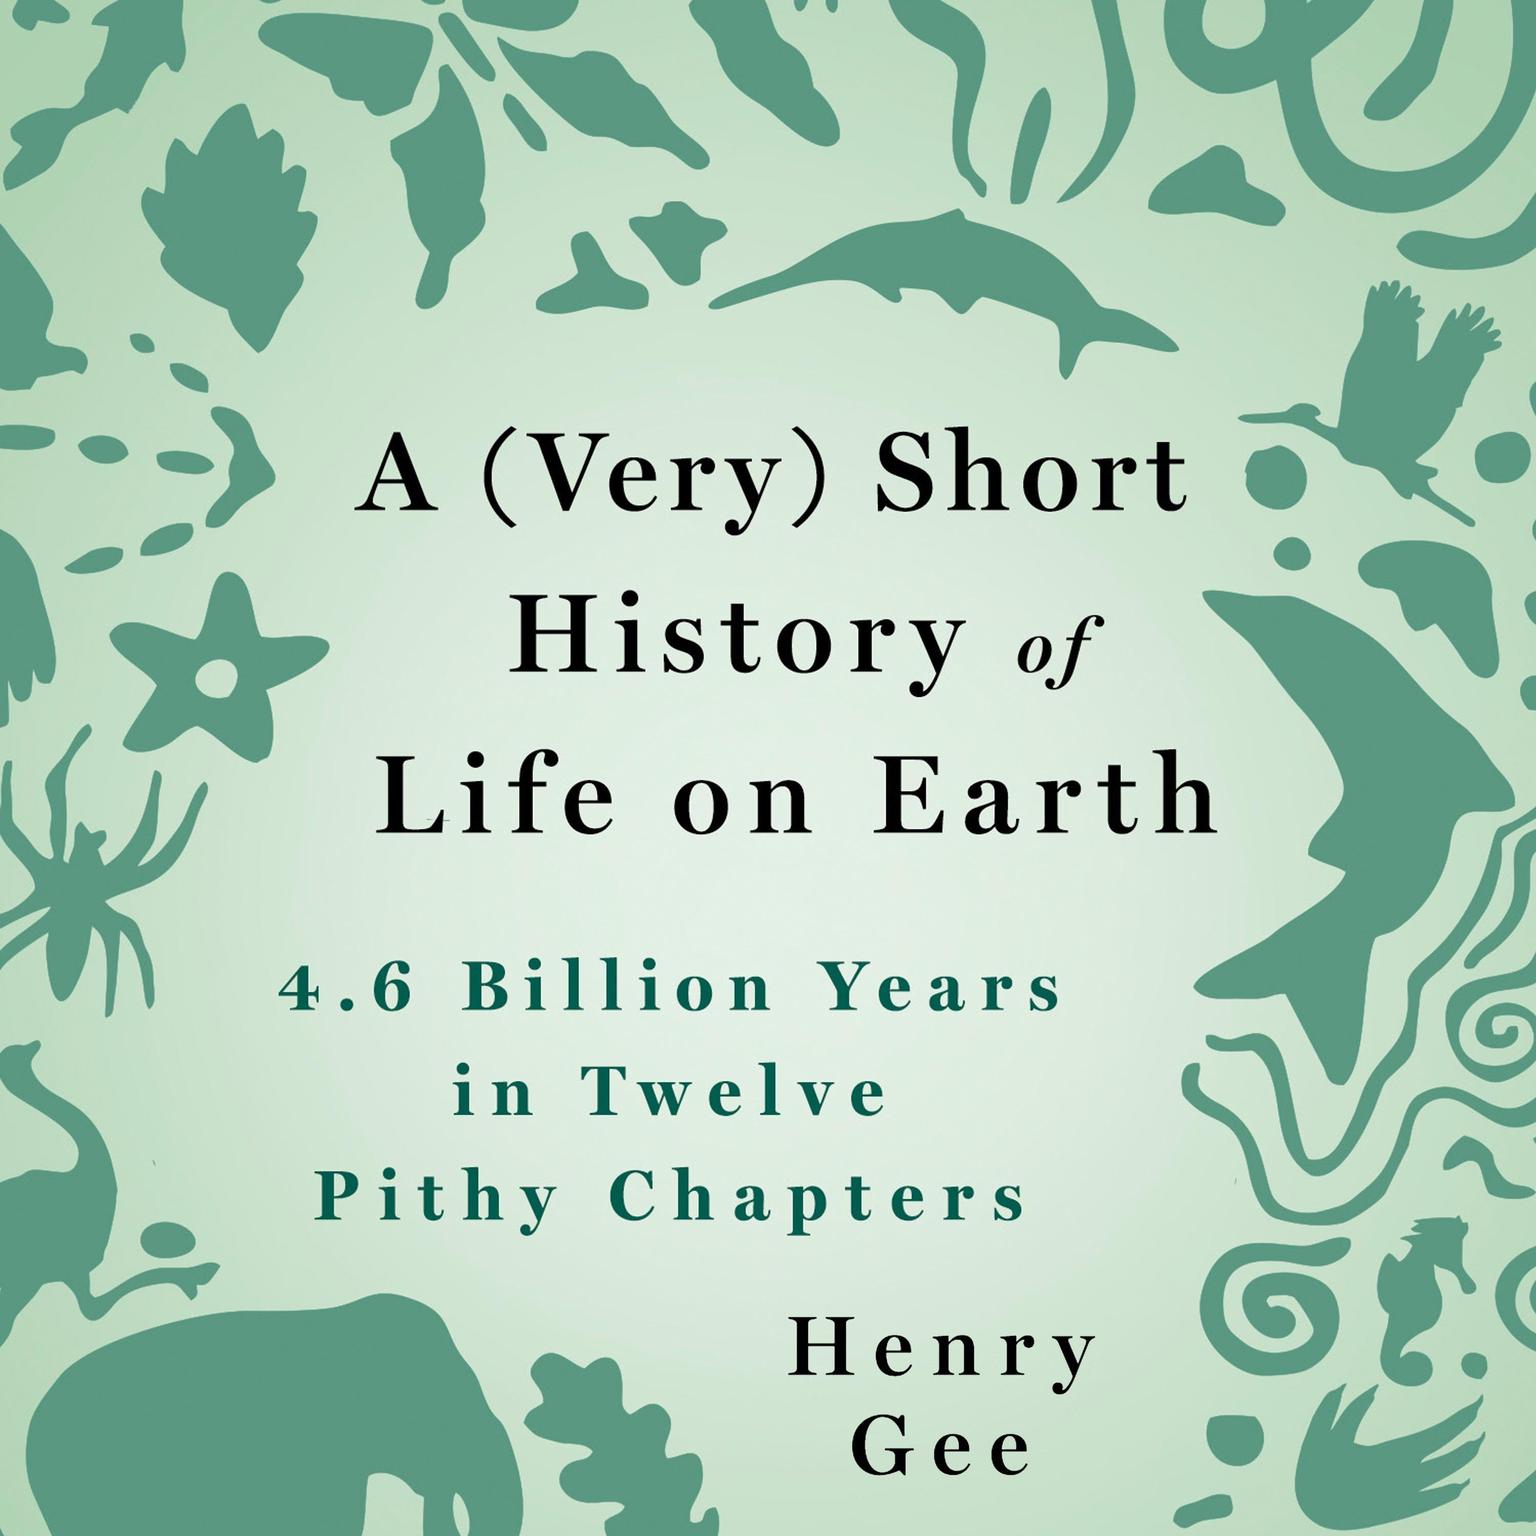 A (Very) Short History of Life on Earth: 4.6 Billion Years in 12 Pithy Chapters Audiobook, by Henry Gee